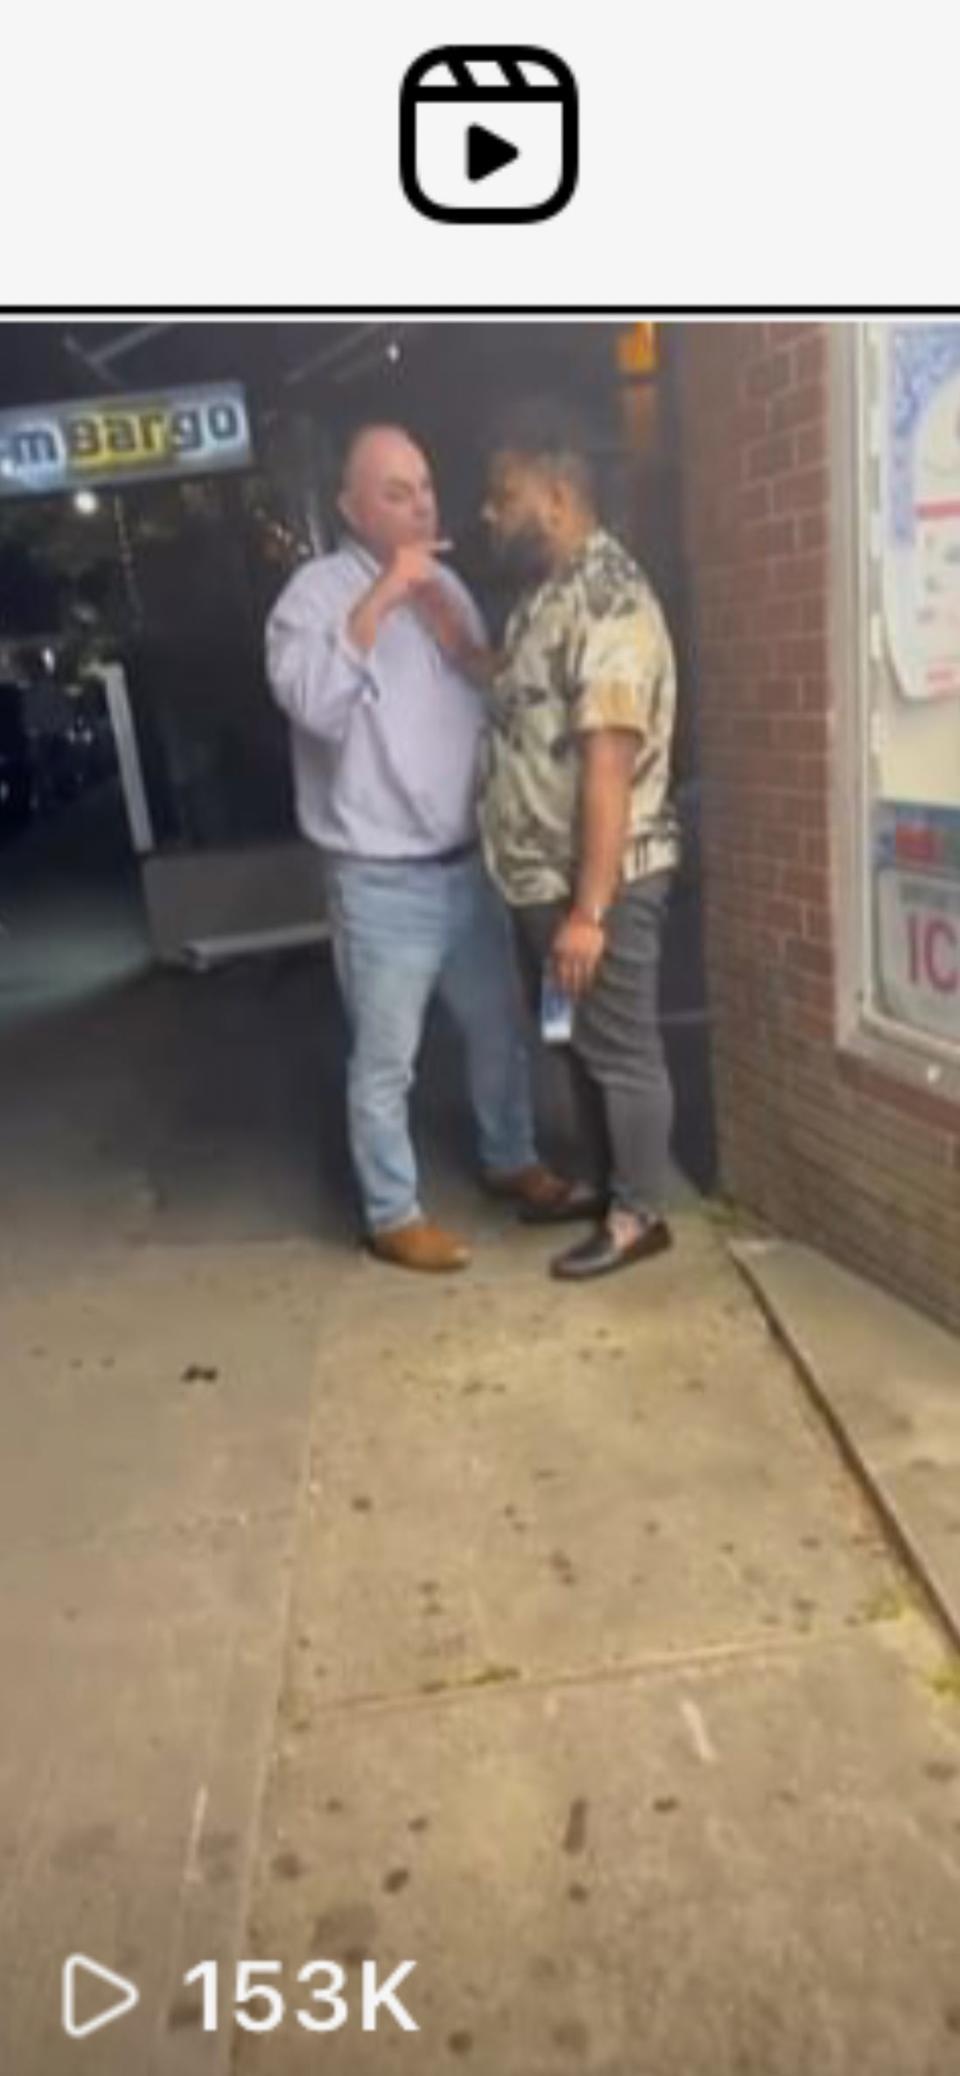 A screenshot from an Instagram video shows Hyannis resident John Shea in a dispute on May 31 with Millyann Phillips, of Medford, on Main Street in Hyannis.  Shea, a bar manager with 40 years of experience, has been indicted on charges of three counts of threatening to commit a crime, assault to intimidate based on race or color, assault and battery to intimidate based on race or color, a civil rights violation and intimidation of a witness.